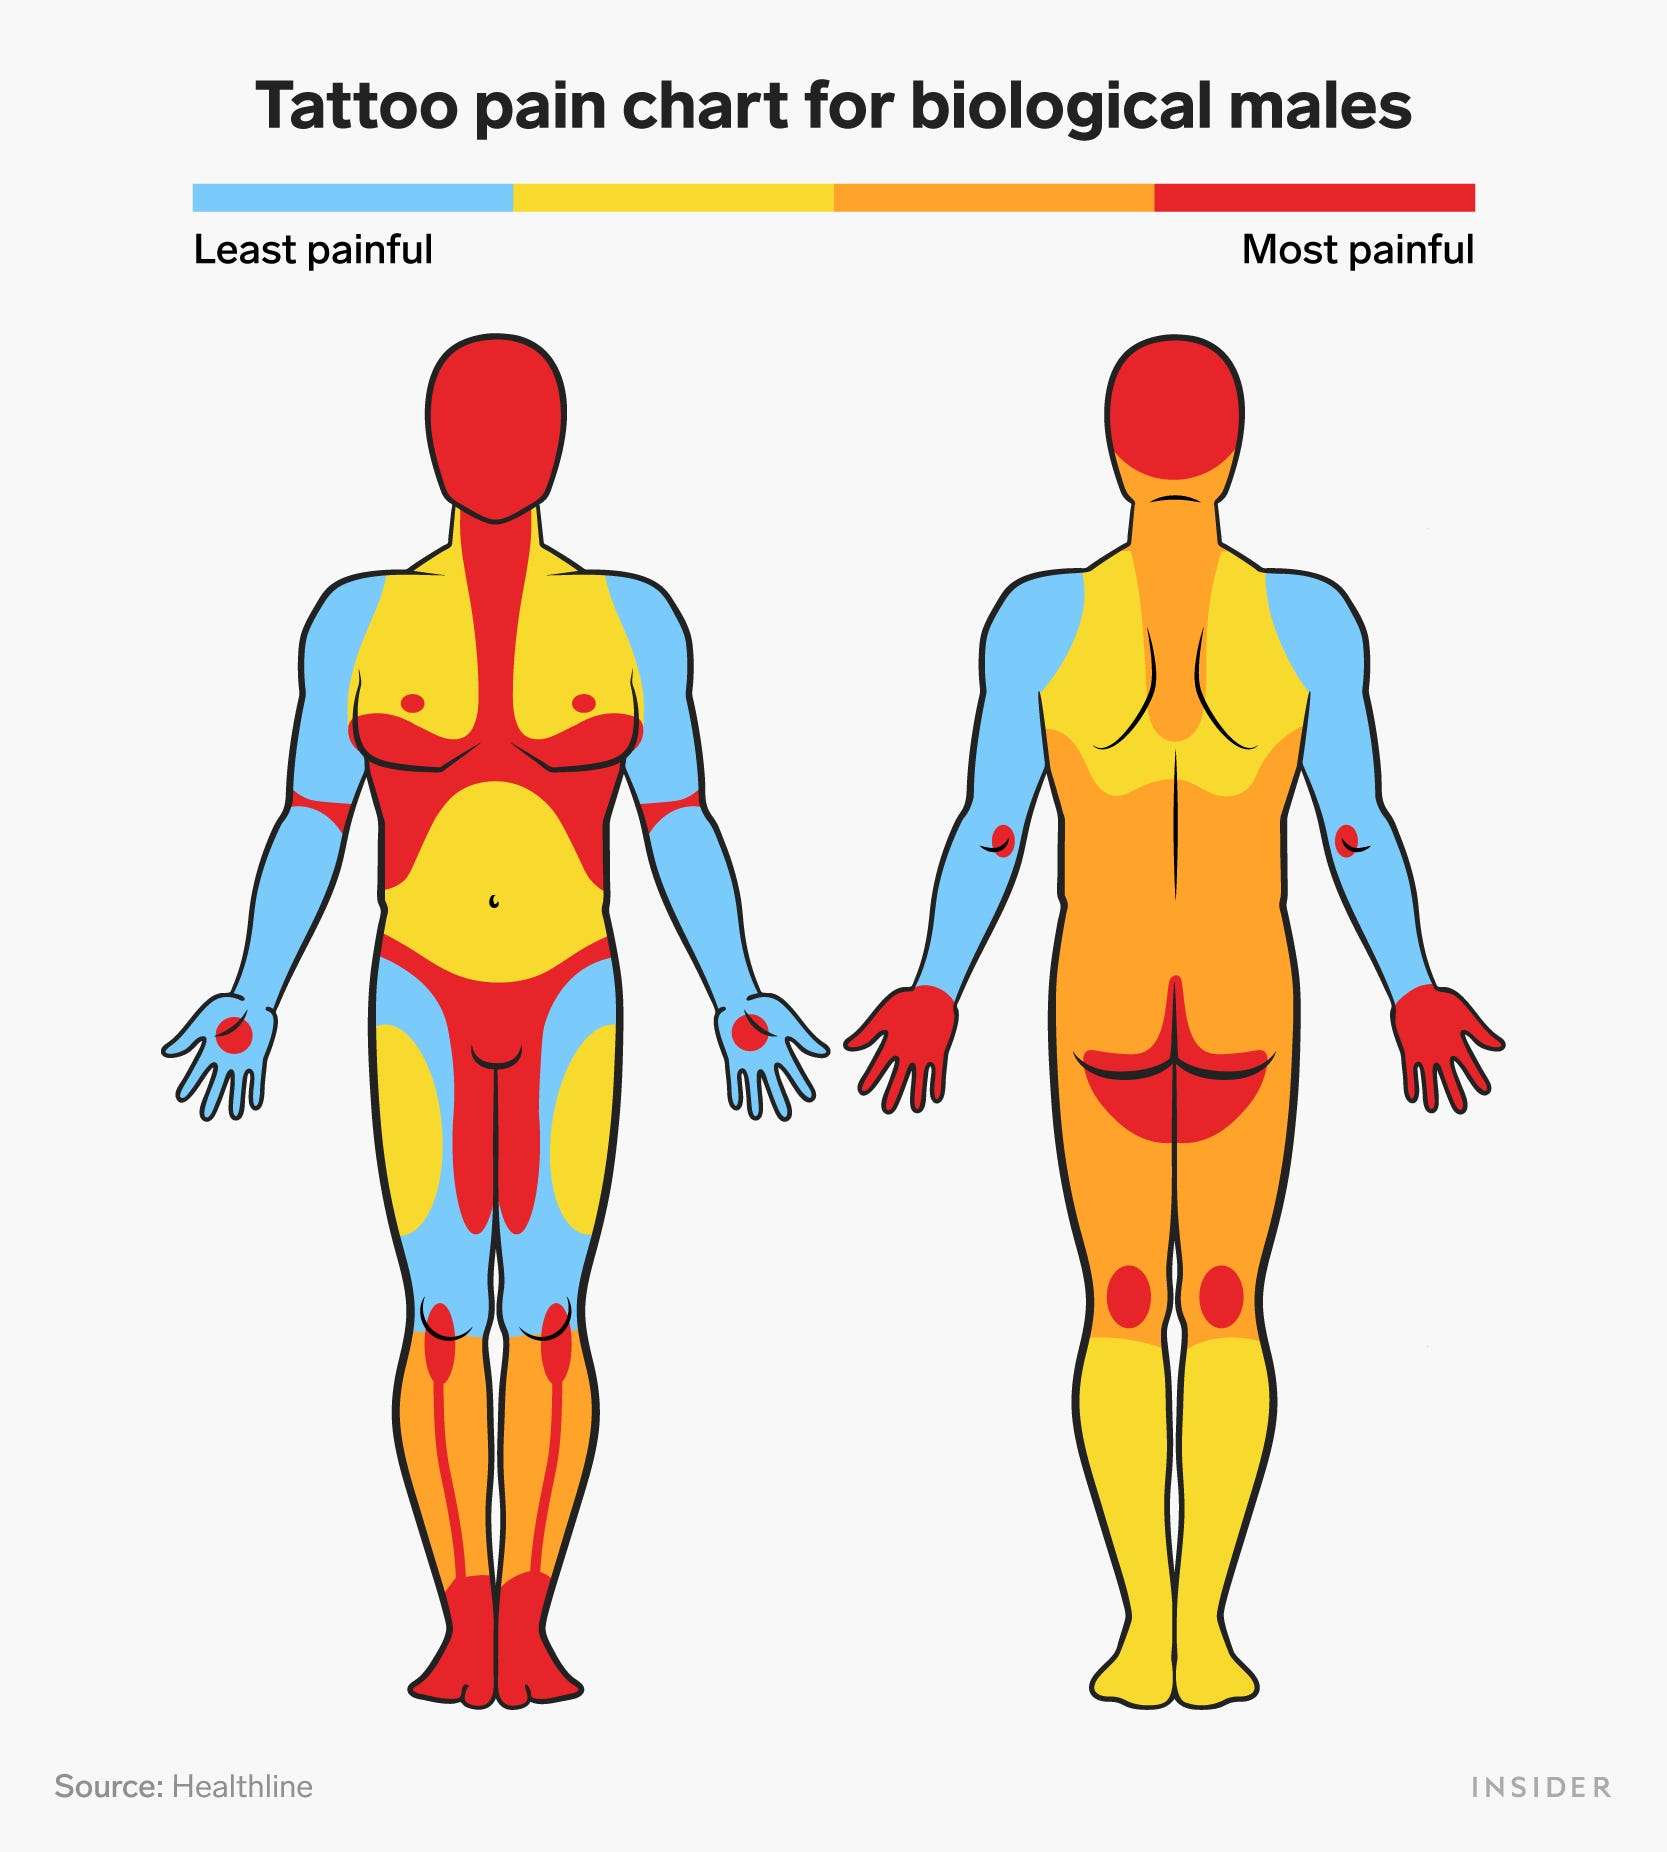 Thinking of a tattoo? Here are the most and least painful spots to get inked